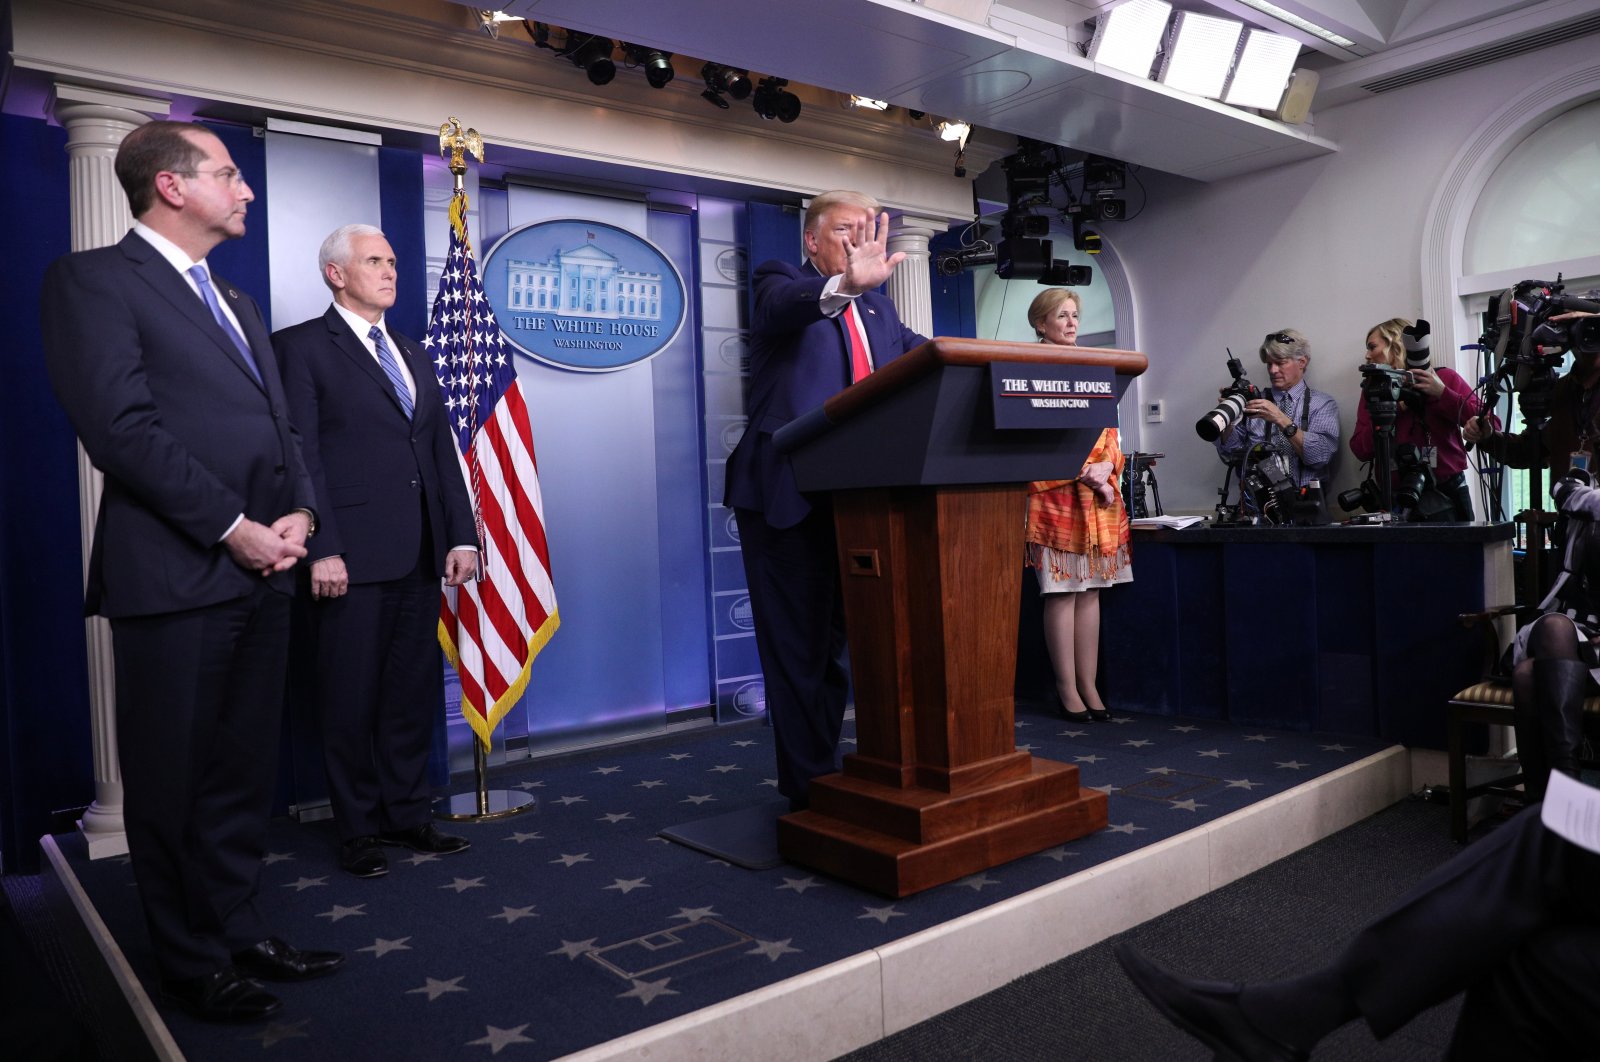 U.S. President Donald Trump puts his hand up to stop a followup question from CNN chief White House correspondent Jim Acosta as he leads the daily coronavirus task force briefing with Secretary of Health and Human Services Alex Acosta, Vice President Mike Pence and White House Coronavirus Response Coordinator Dr. Deborah Birx in the Brady press briefing room at the White House in Washington, U.S., April 3, 2020. (Reuters Photo)